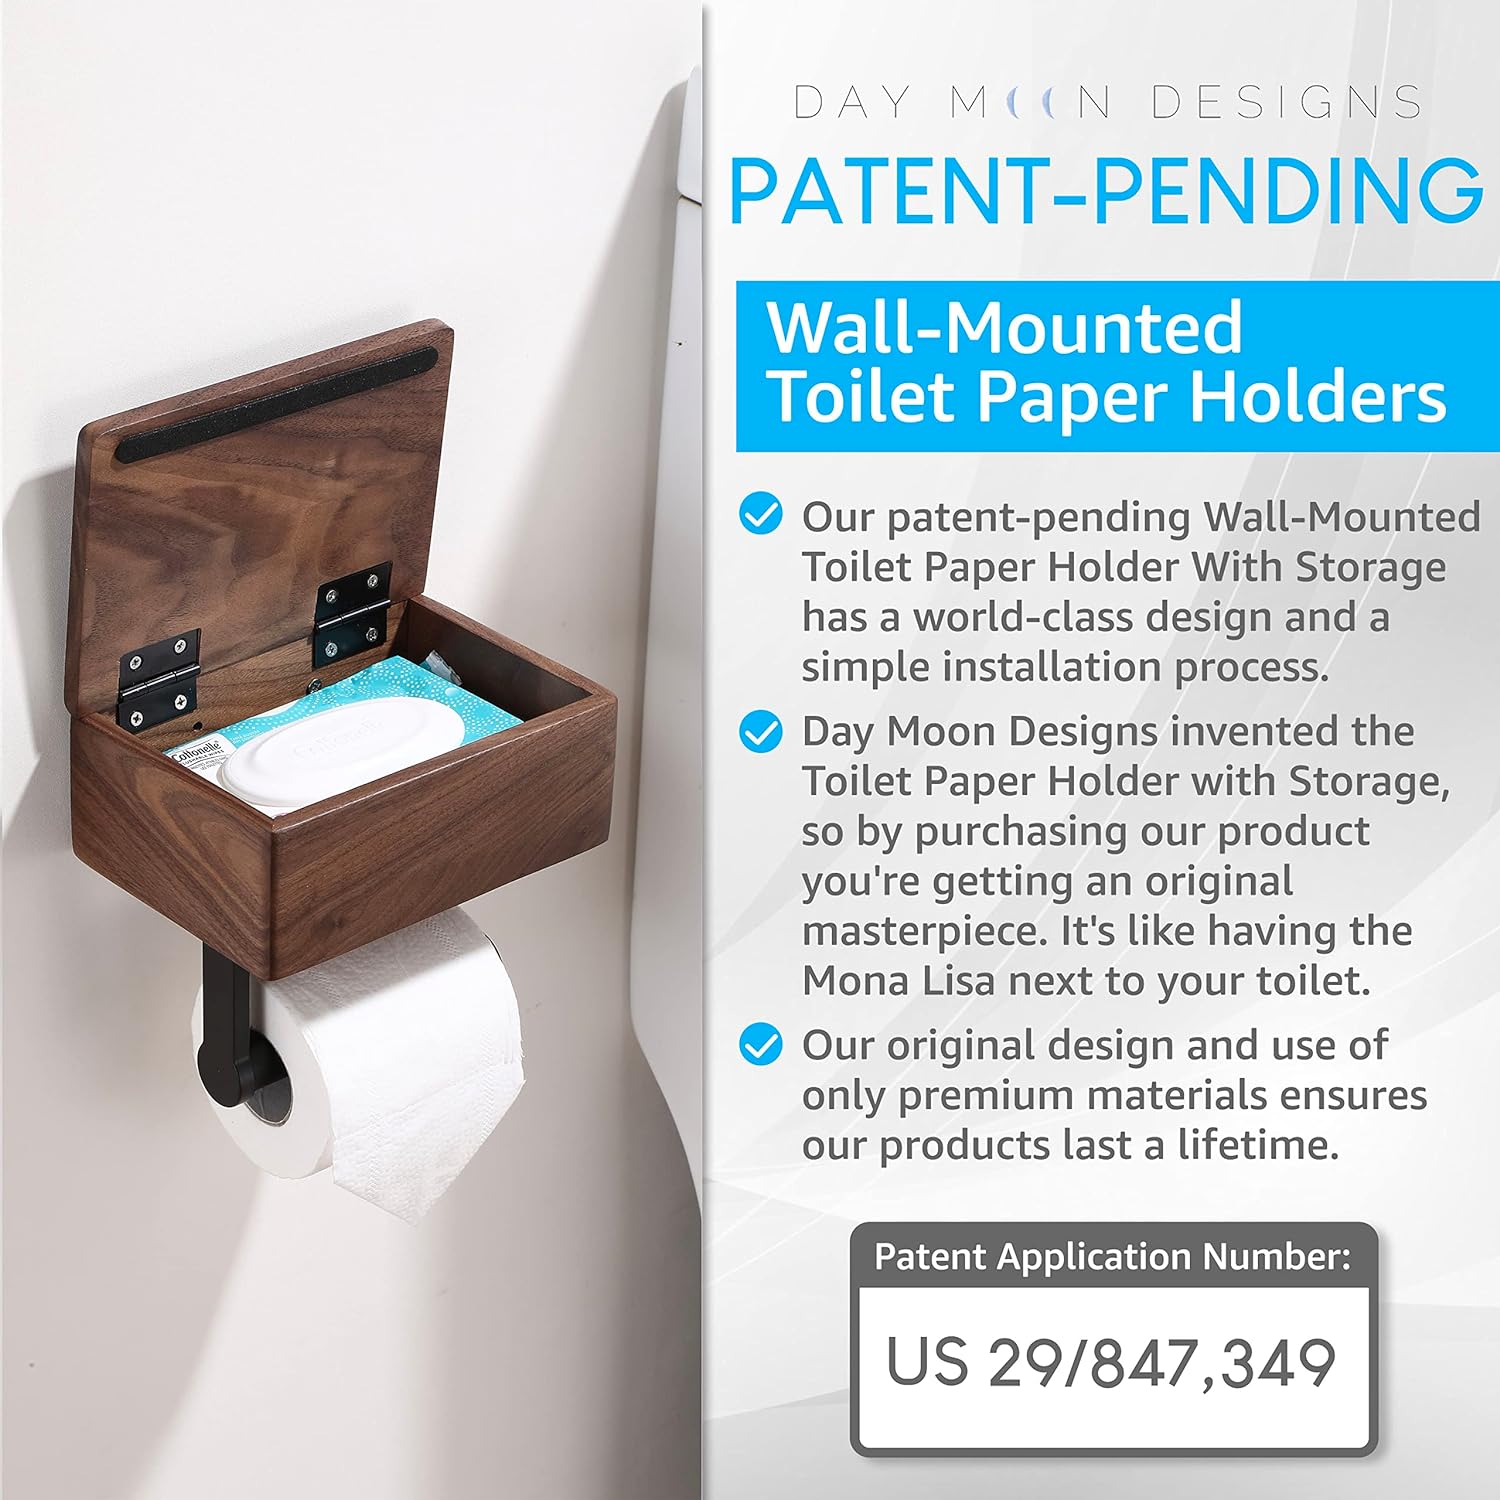 https://bigbigmart.com/wp-content/uploads/2023/10/Day-Moon-Designs-Toilet-Paper-Holder-with-Shelf-Flushable-Wipes-Dispenser-Storage-Fits-Any-Bathroom-Keep-Your-Wet-Wipes-Hidden-Wooden-Wall-Mount-Bathroom-Organizer-Small-Dark-Wood7.jpg